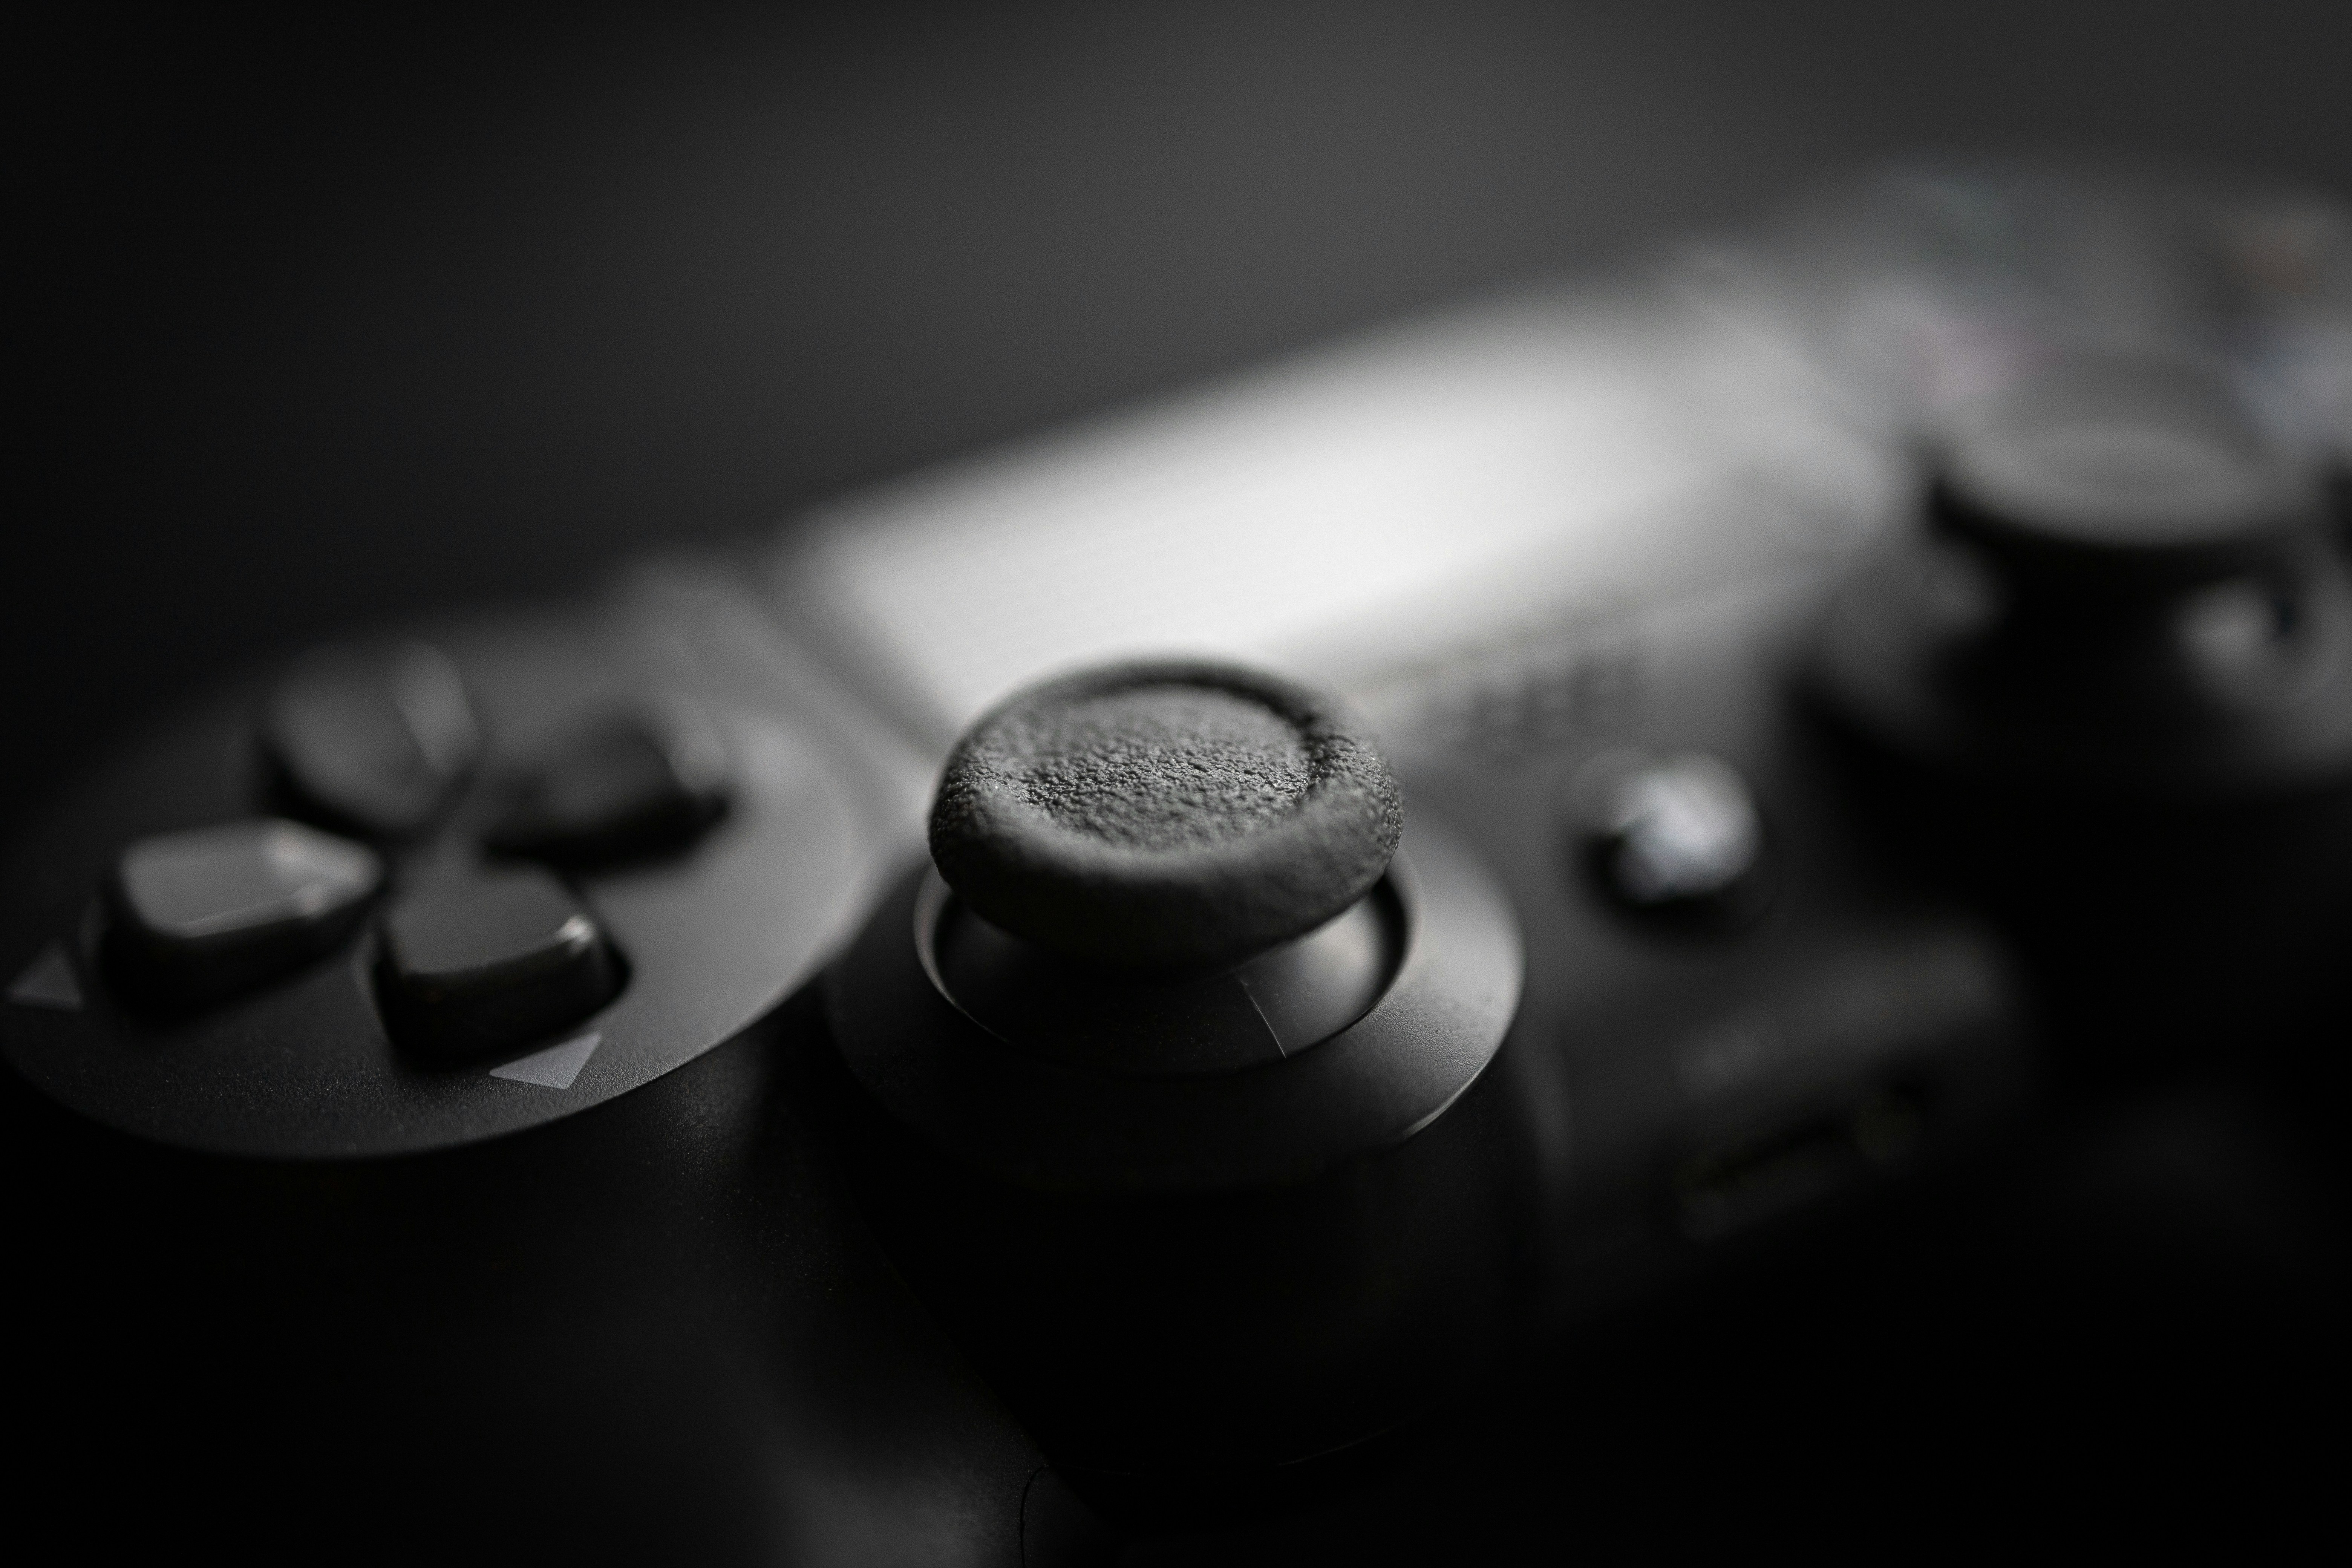 Close-up of a PlayStation 4 controller.